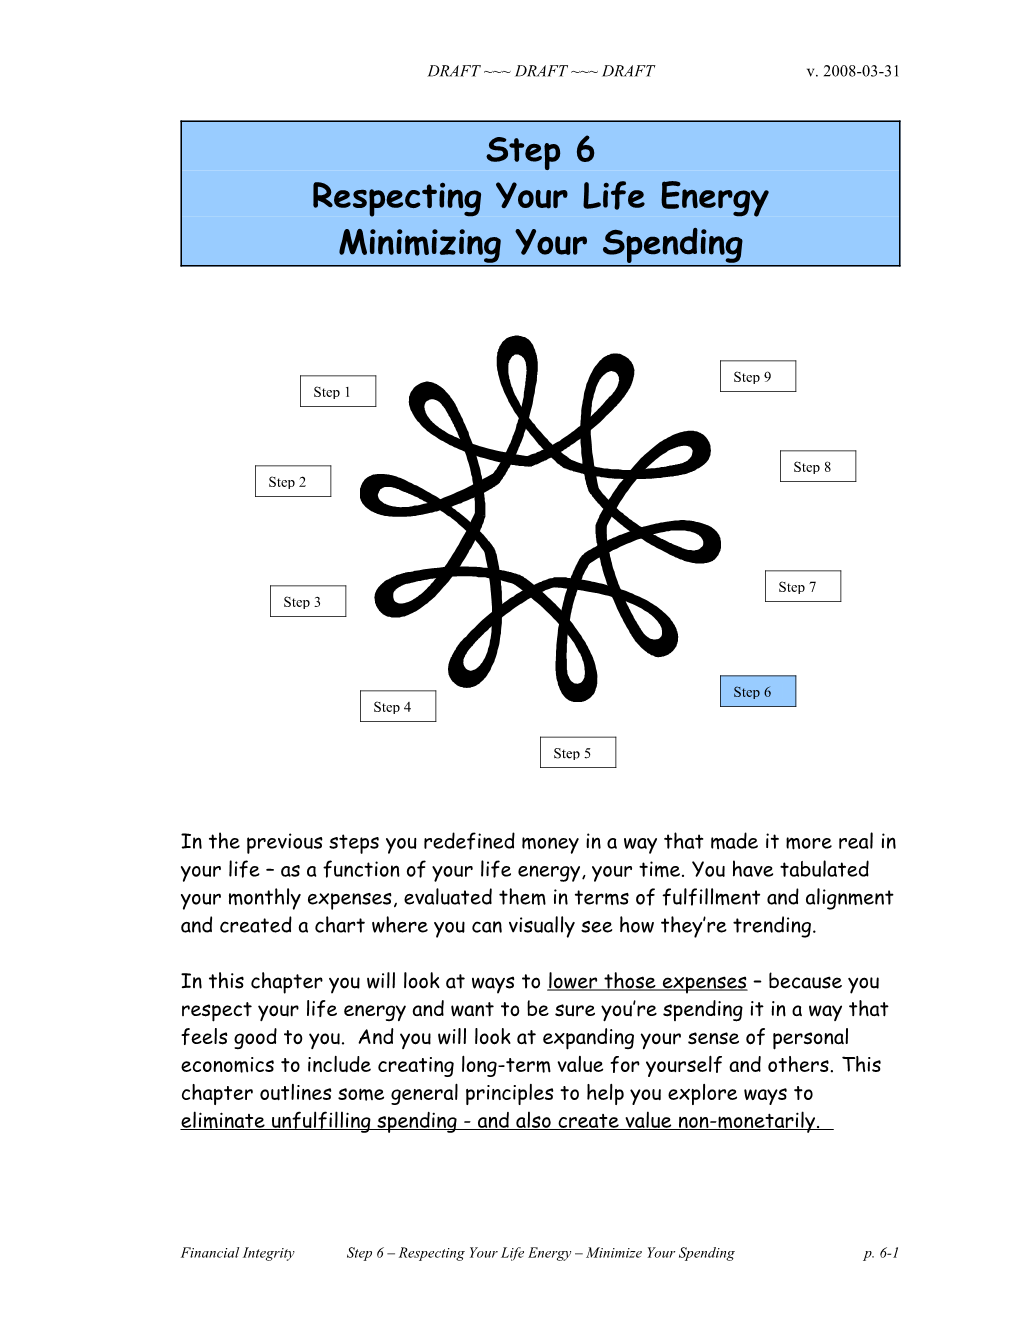 Respecting Your Life Energy